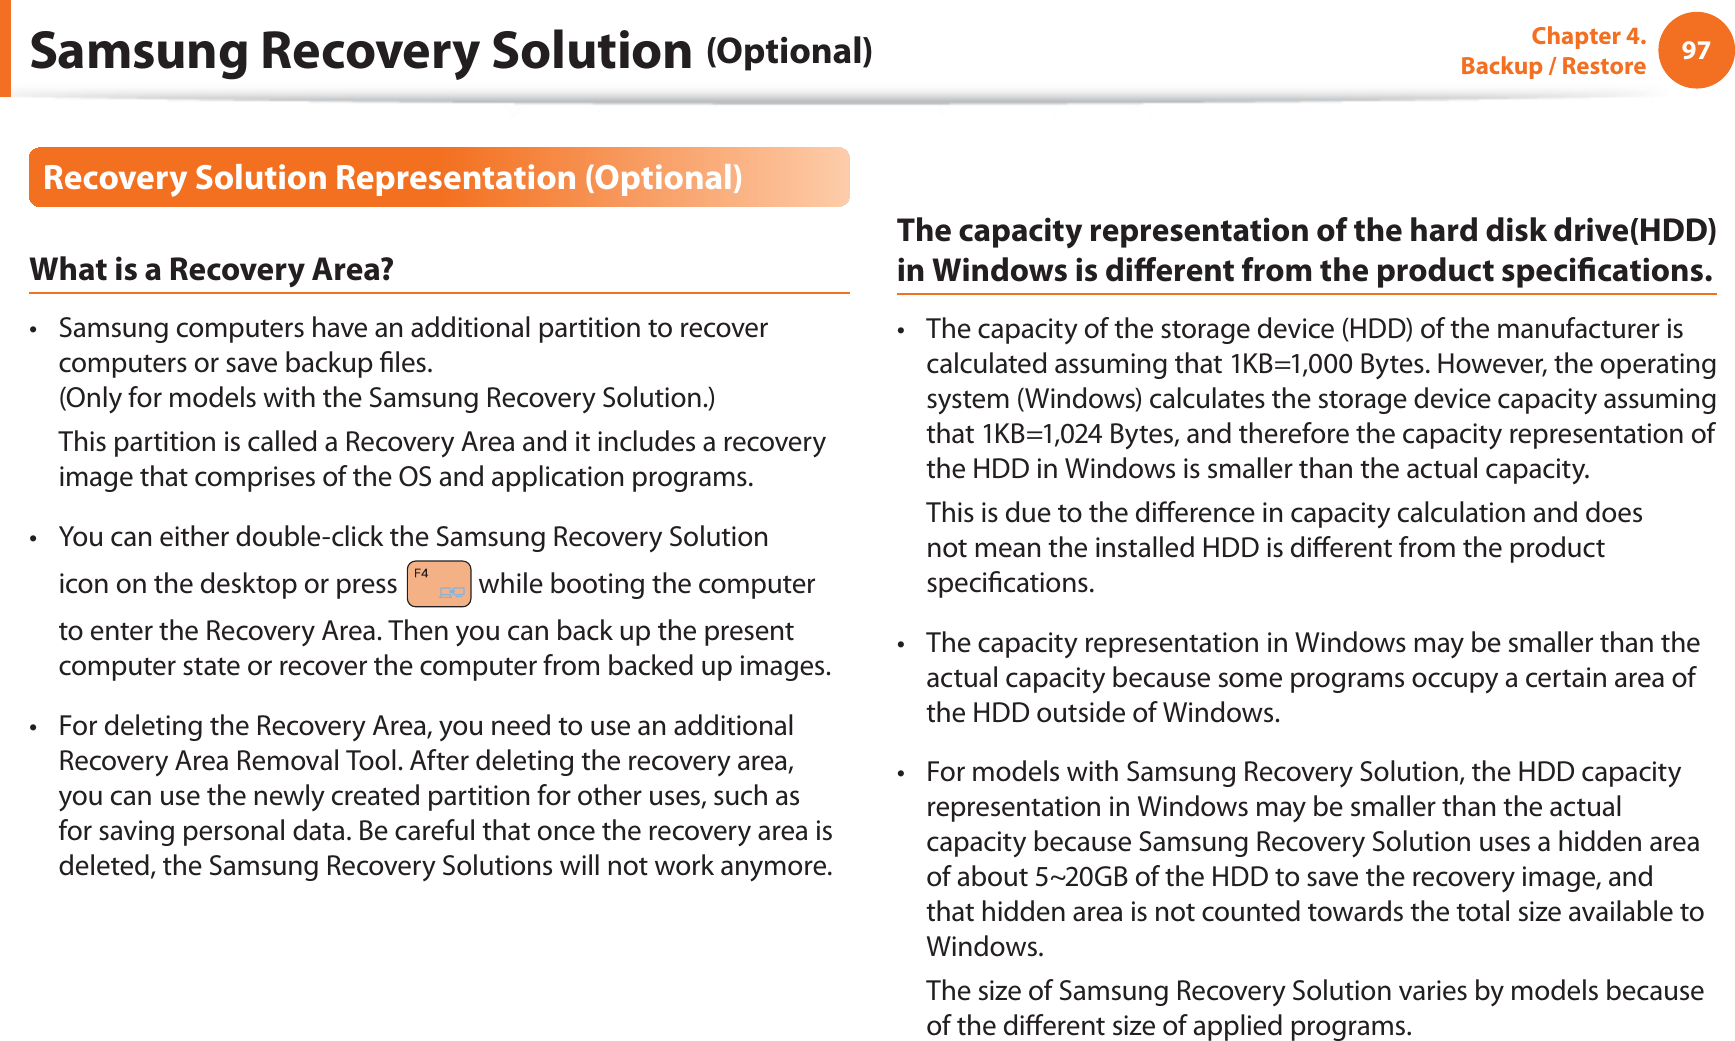 97Chapter 4.   Backup / RestoreRecovery Solution Representation (Optional)What is a Recovery Area?Samsung computers have an additional partition to recover t computers or save backup ﬁles. (Only for models with the Samsung Recovery Solution.)  This partition is called a Recovery Area and it includes a recovery image that comprises of the OS and application programs.You can either double-click the Samsung Recovery Solution t icon on the desktop or press   while booting the computer to enter the Recovery Area. Then you can back up the present computer state or recover the computer from backed up images.For deleting the Recovery Area, you need to use an additional t Recovery Area Removal Tool. After deleting the recovery area, you can use the newly created partition for other uses, such as for saving personal data. Be careful that once the recovery area is deleted, the Samsung Recovery Solutions will not work anymore.The capacity representation of the hard disk drive(HDD) in Windows is diﬀerent from the product speciﬁcations.The capacity of the storage device (HDD) of the manufacturer is t calculated assuming that 1KB=1,000 Bytes. However, the operating system (Windows) calculates the storage device capacity assuming that 1KB=1,024 Bytes, and therefore the capacity representation of the HDD in Windows is smaller than the actual capacity.  This is due to the diﬀerence in capacity calculation and does not mean the installed HDD is diﬀerent from the product speciﬁcations.The capacity representation in Windows may be smaller than the t actual capacity because some programs occupy a certain area of the HDD outside of Windows.For models with Samsung Recovery Solution, the HDD capacity t representation in Windows may be smaller than the actual capacity because Samsung Recovery Solution uses a hidden area of about 5~20GB of the HDD to save the recovery image, and that hidden area is not counted towards the total size available to Windows.  The size of Samsung Recovery Solution varies by models because of the diﬀerent size of applied programs.Samsung Recovery Solution (Optional)